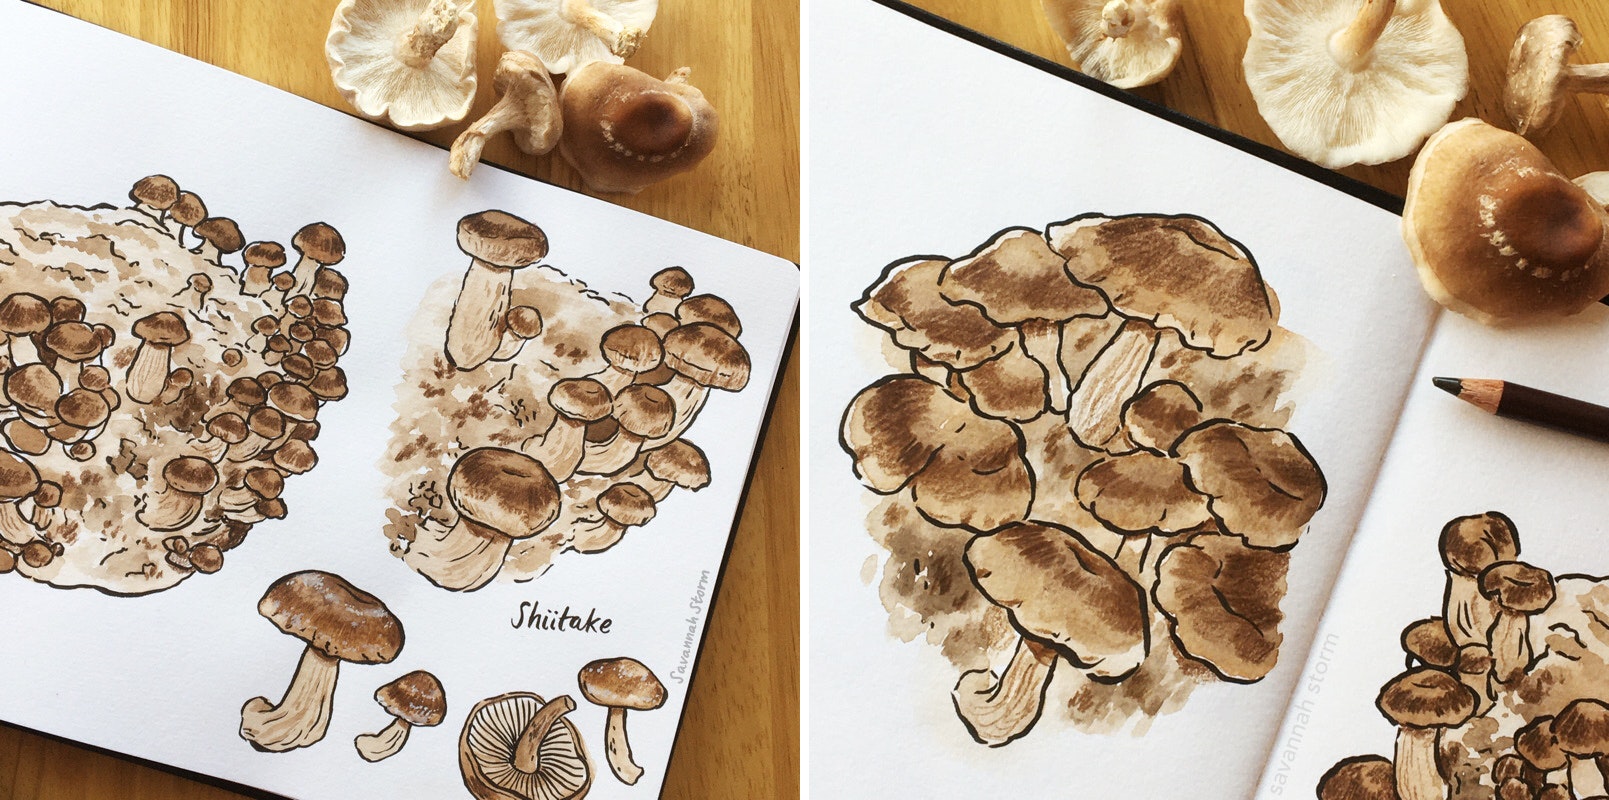 Sketchbook pages showing the work in progress of creating hand drawn illustrations of shiitake mushrooms.